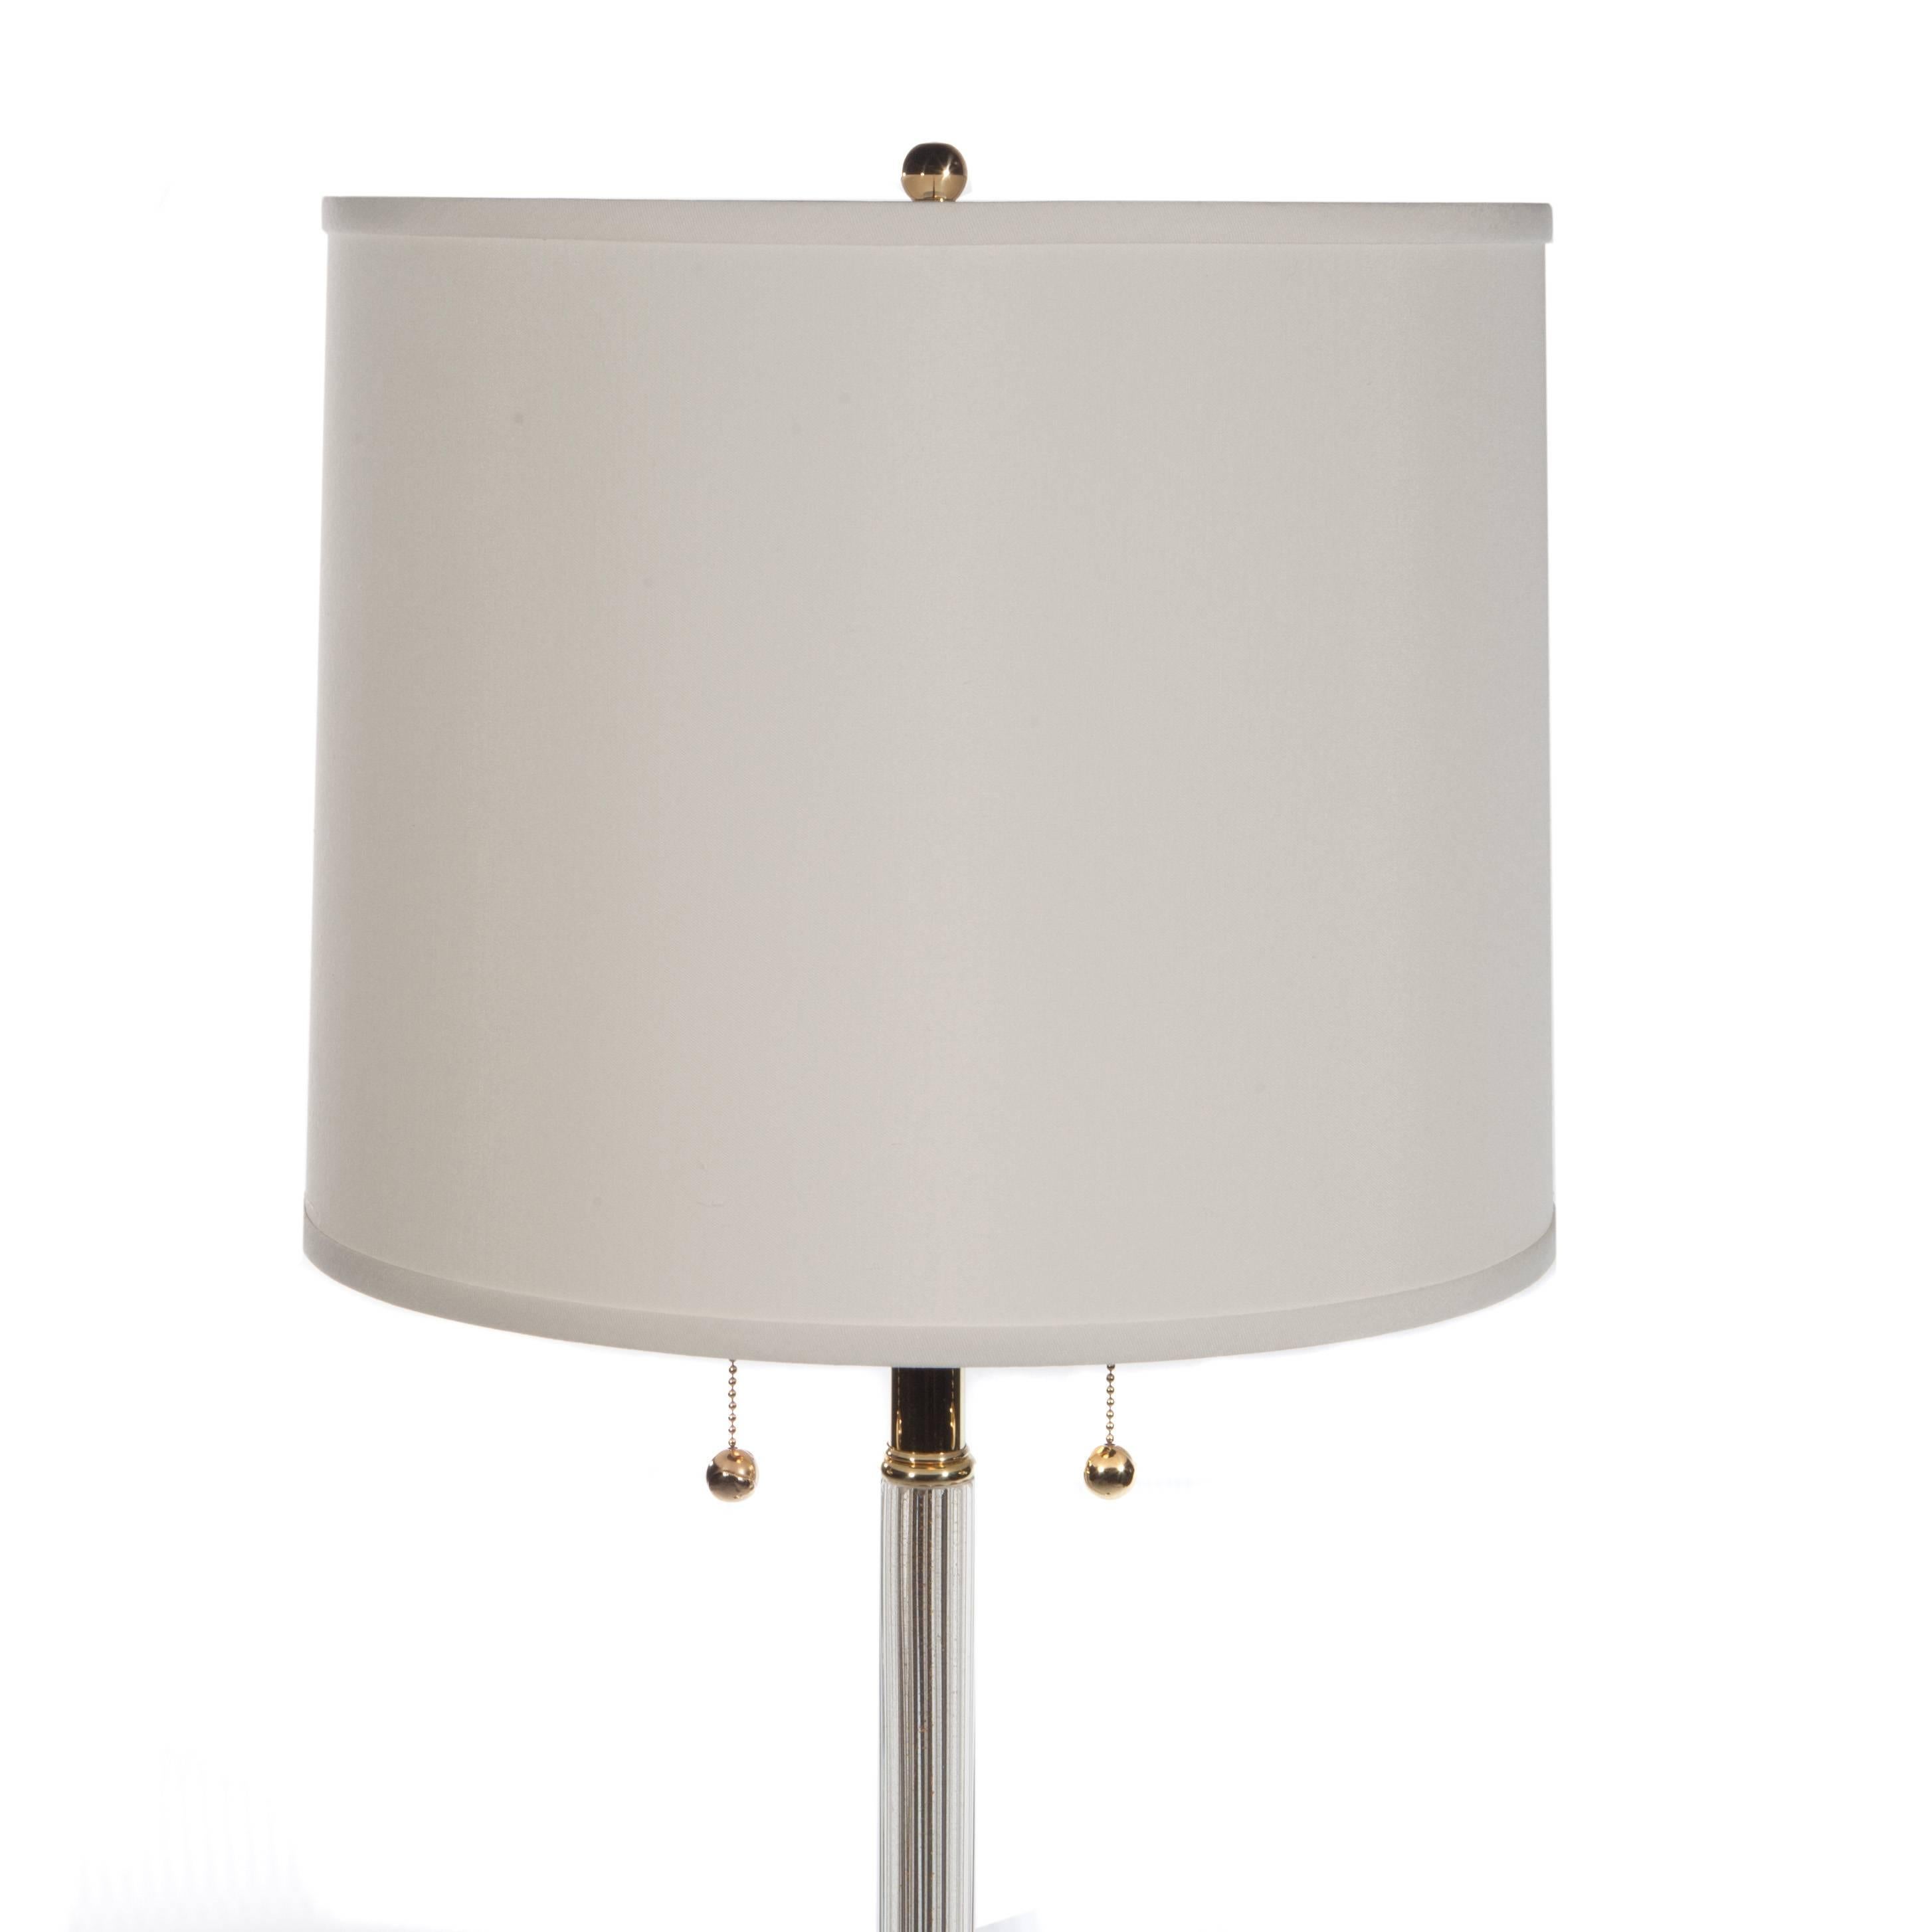 Elegant 1960s floor lamp with circular brass base supporting a single, fluted neck made of gold-flecked Murano glass. Completely rewired and restored with all brass elements re-plated and re-lacquered, new off-white linen shade. Two bulbs in